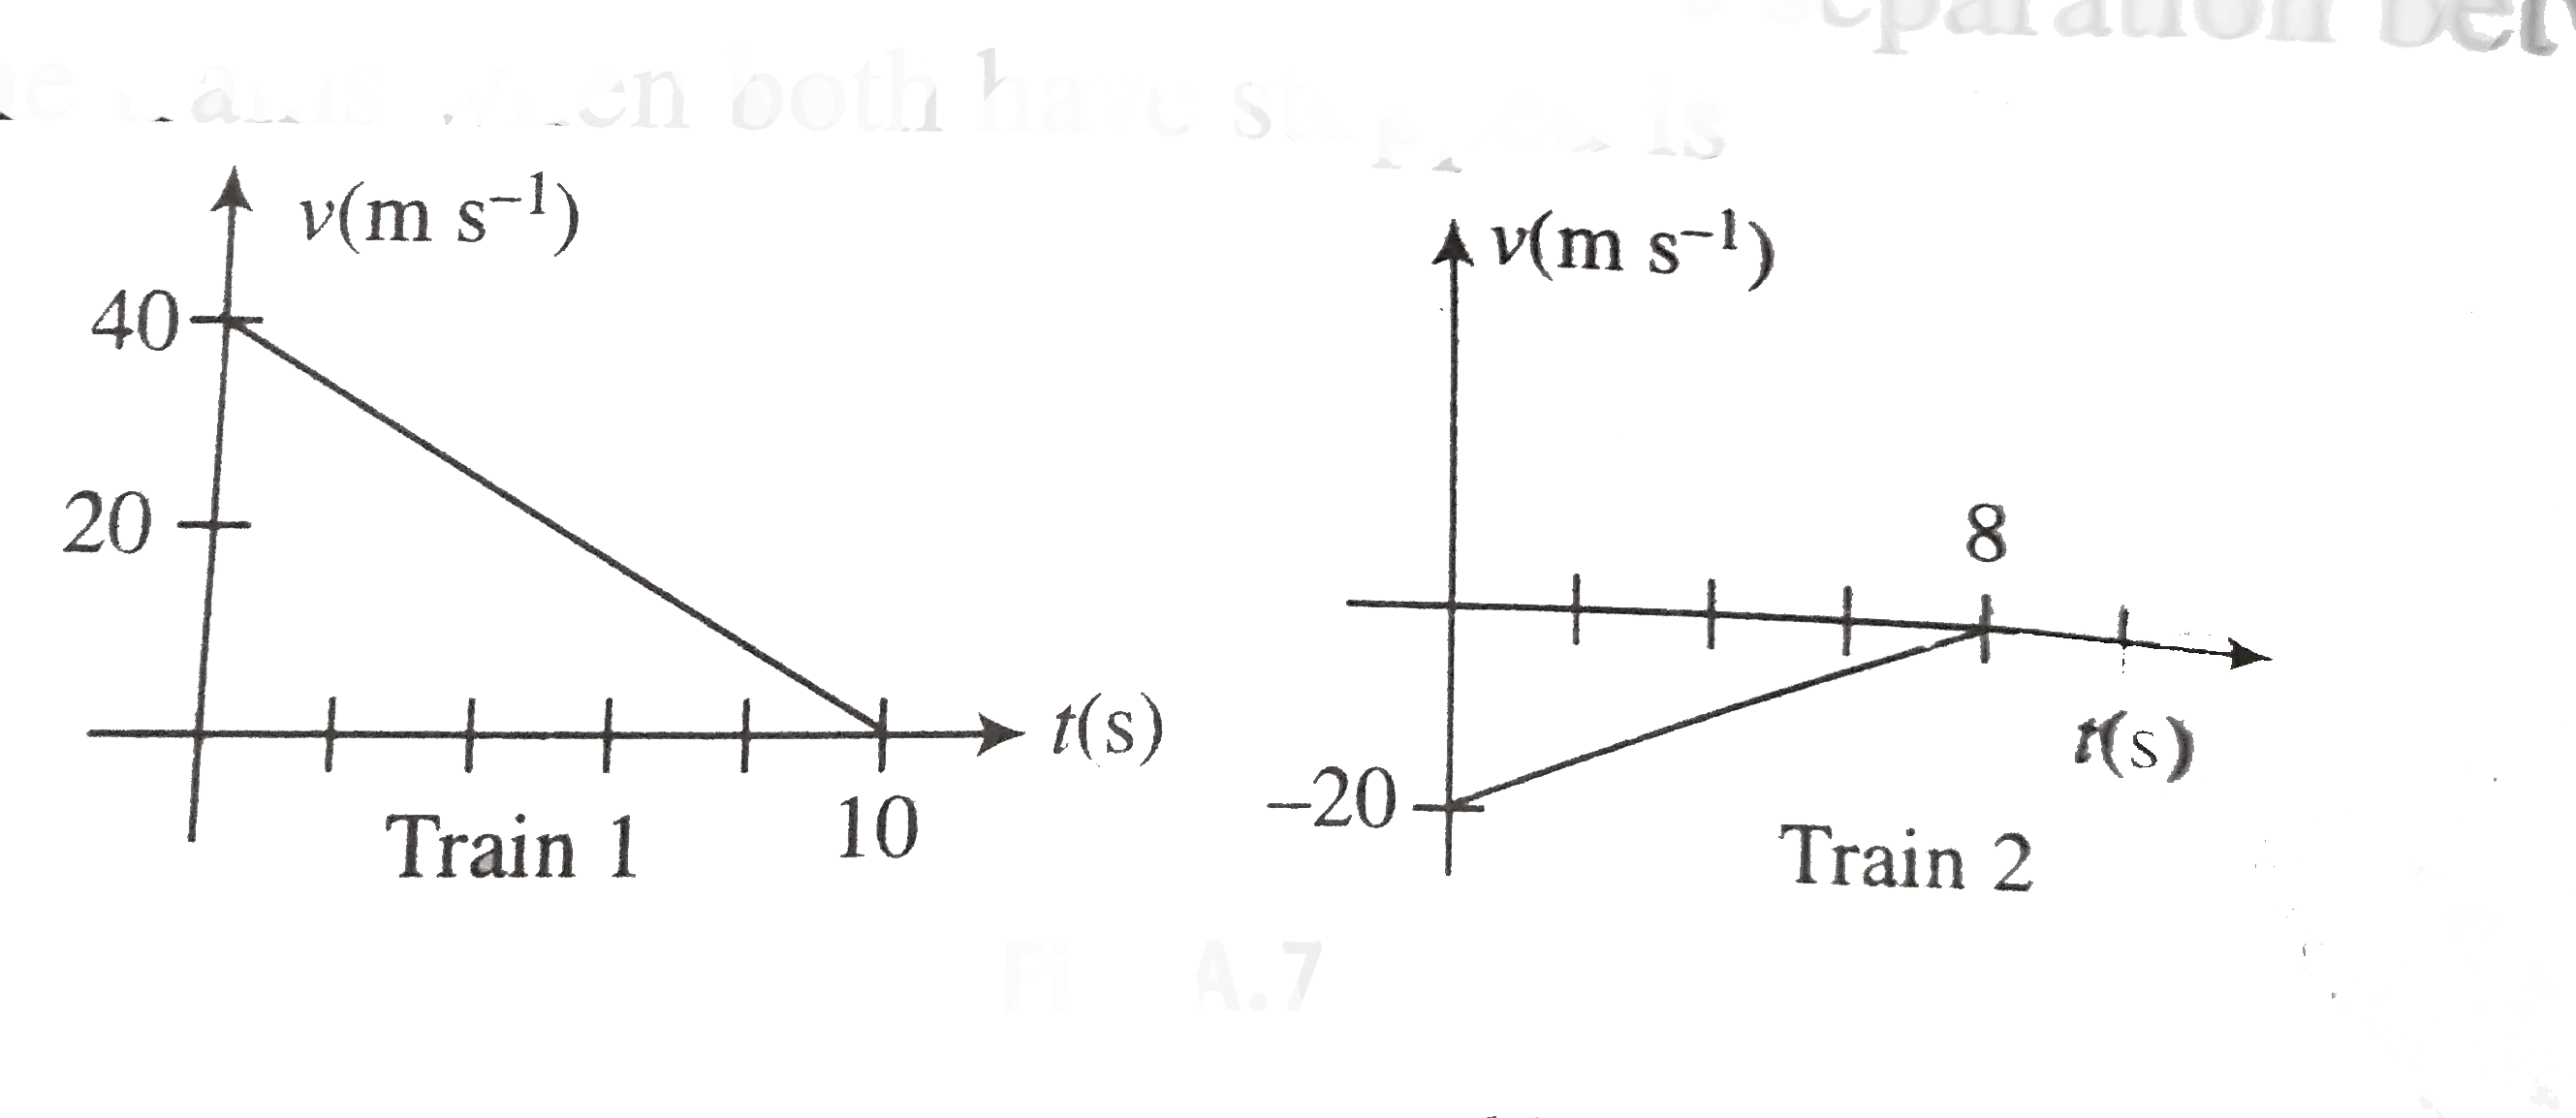 Two trains, which are moving along different tracks in opposite directions, are put on the same track due to a mistake. Their drivers, on noticing the mistake, start slowing down the trains when the trains are 300 m apart. Graphs given in figure show their velocities as function of time as the trains slow down. The separation between the trains when both have stopped is